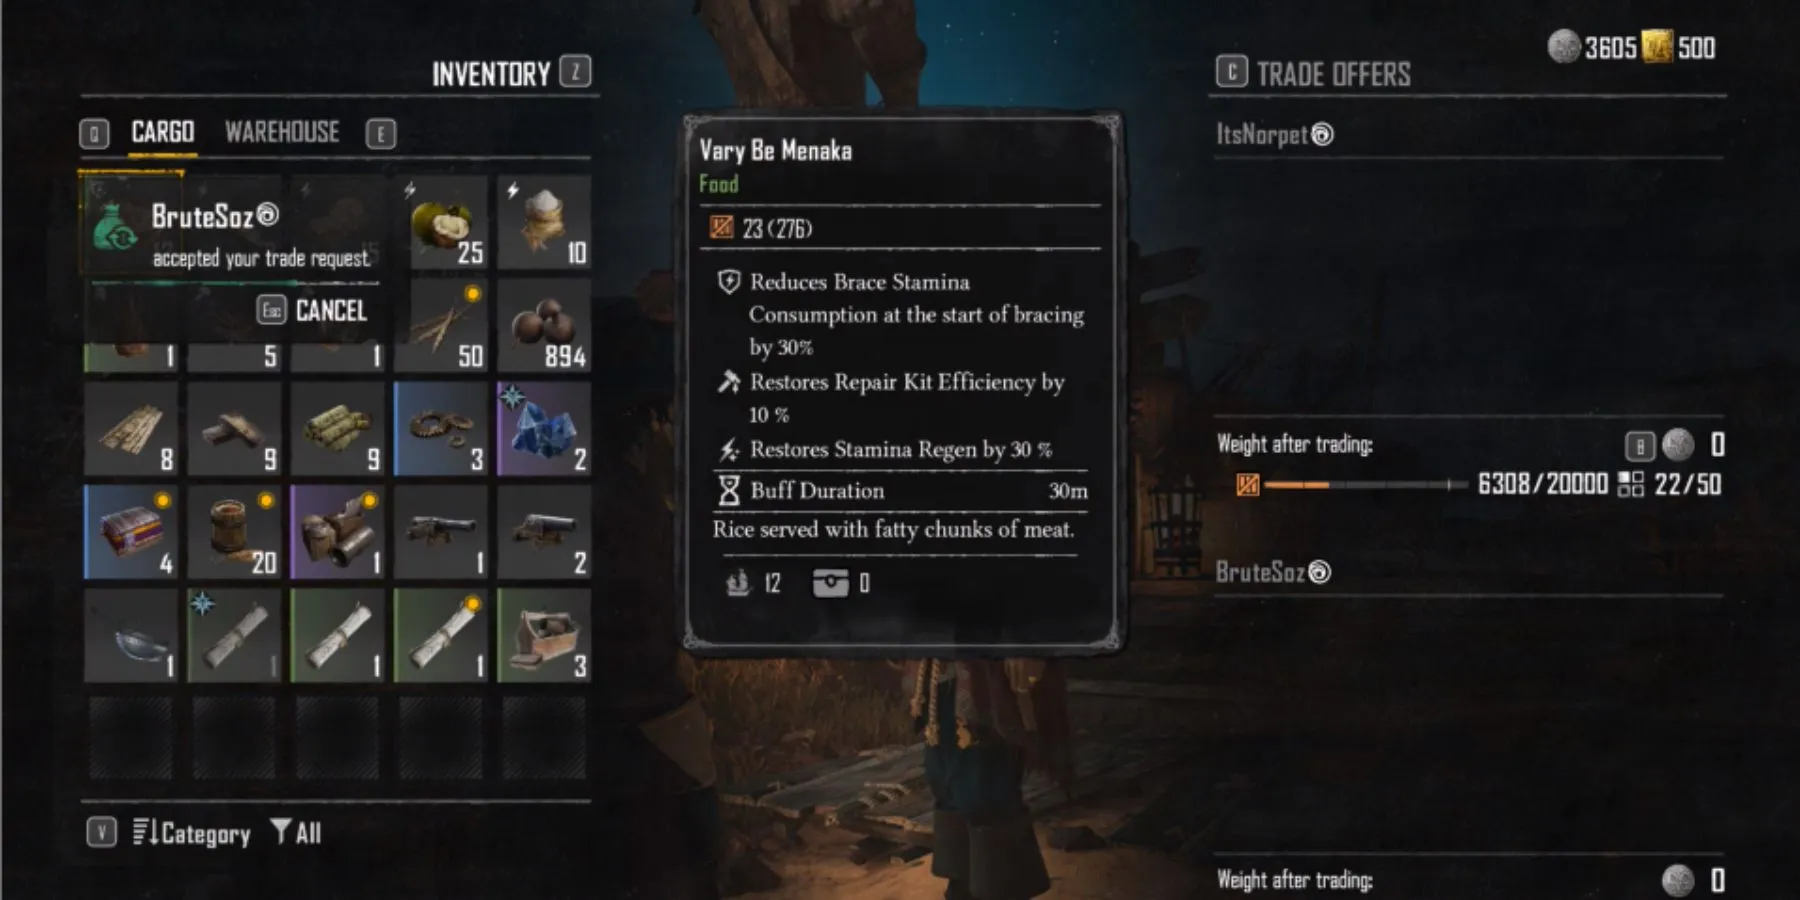 Skull and Bones PVP Trade Offers